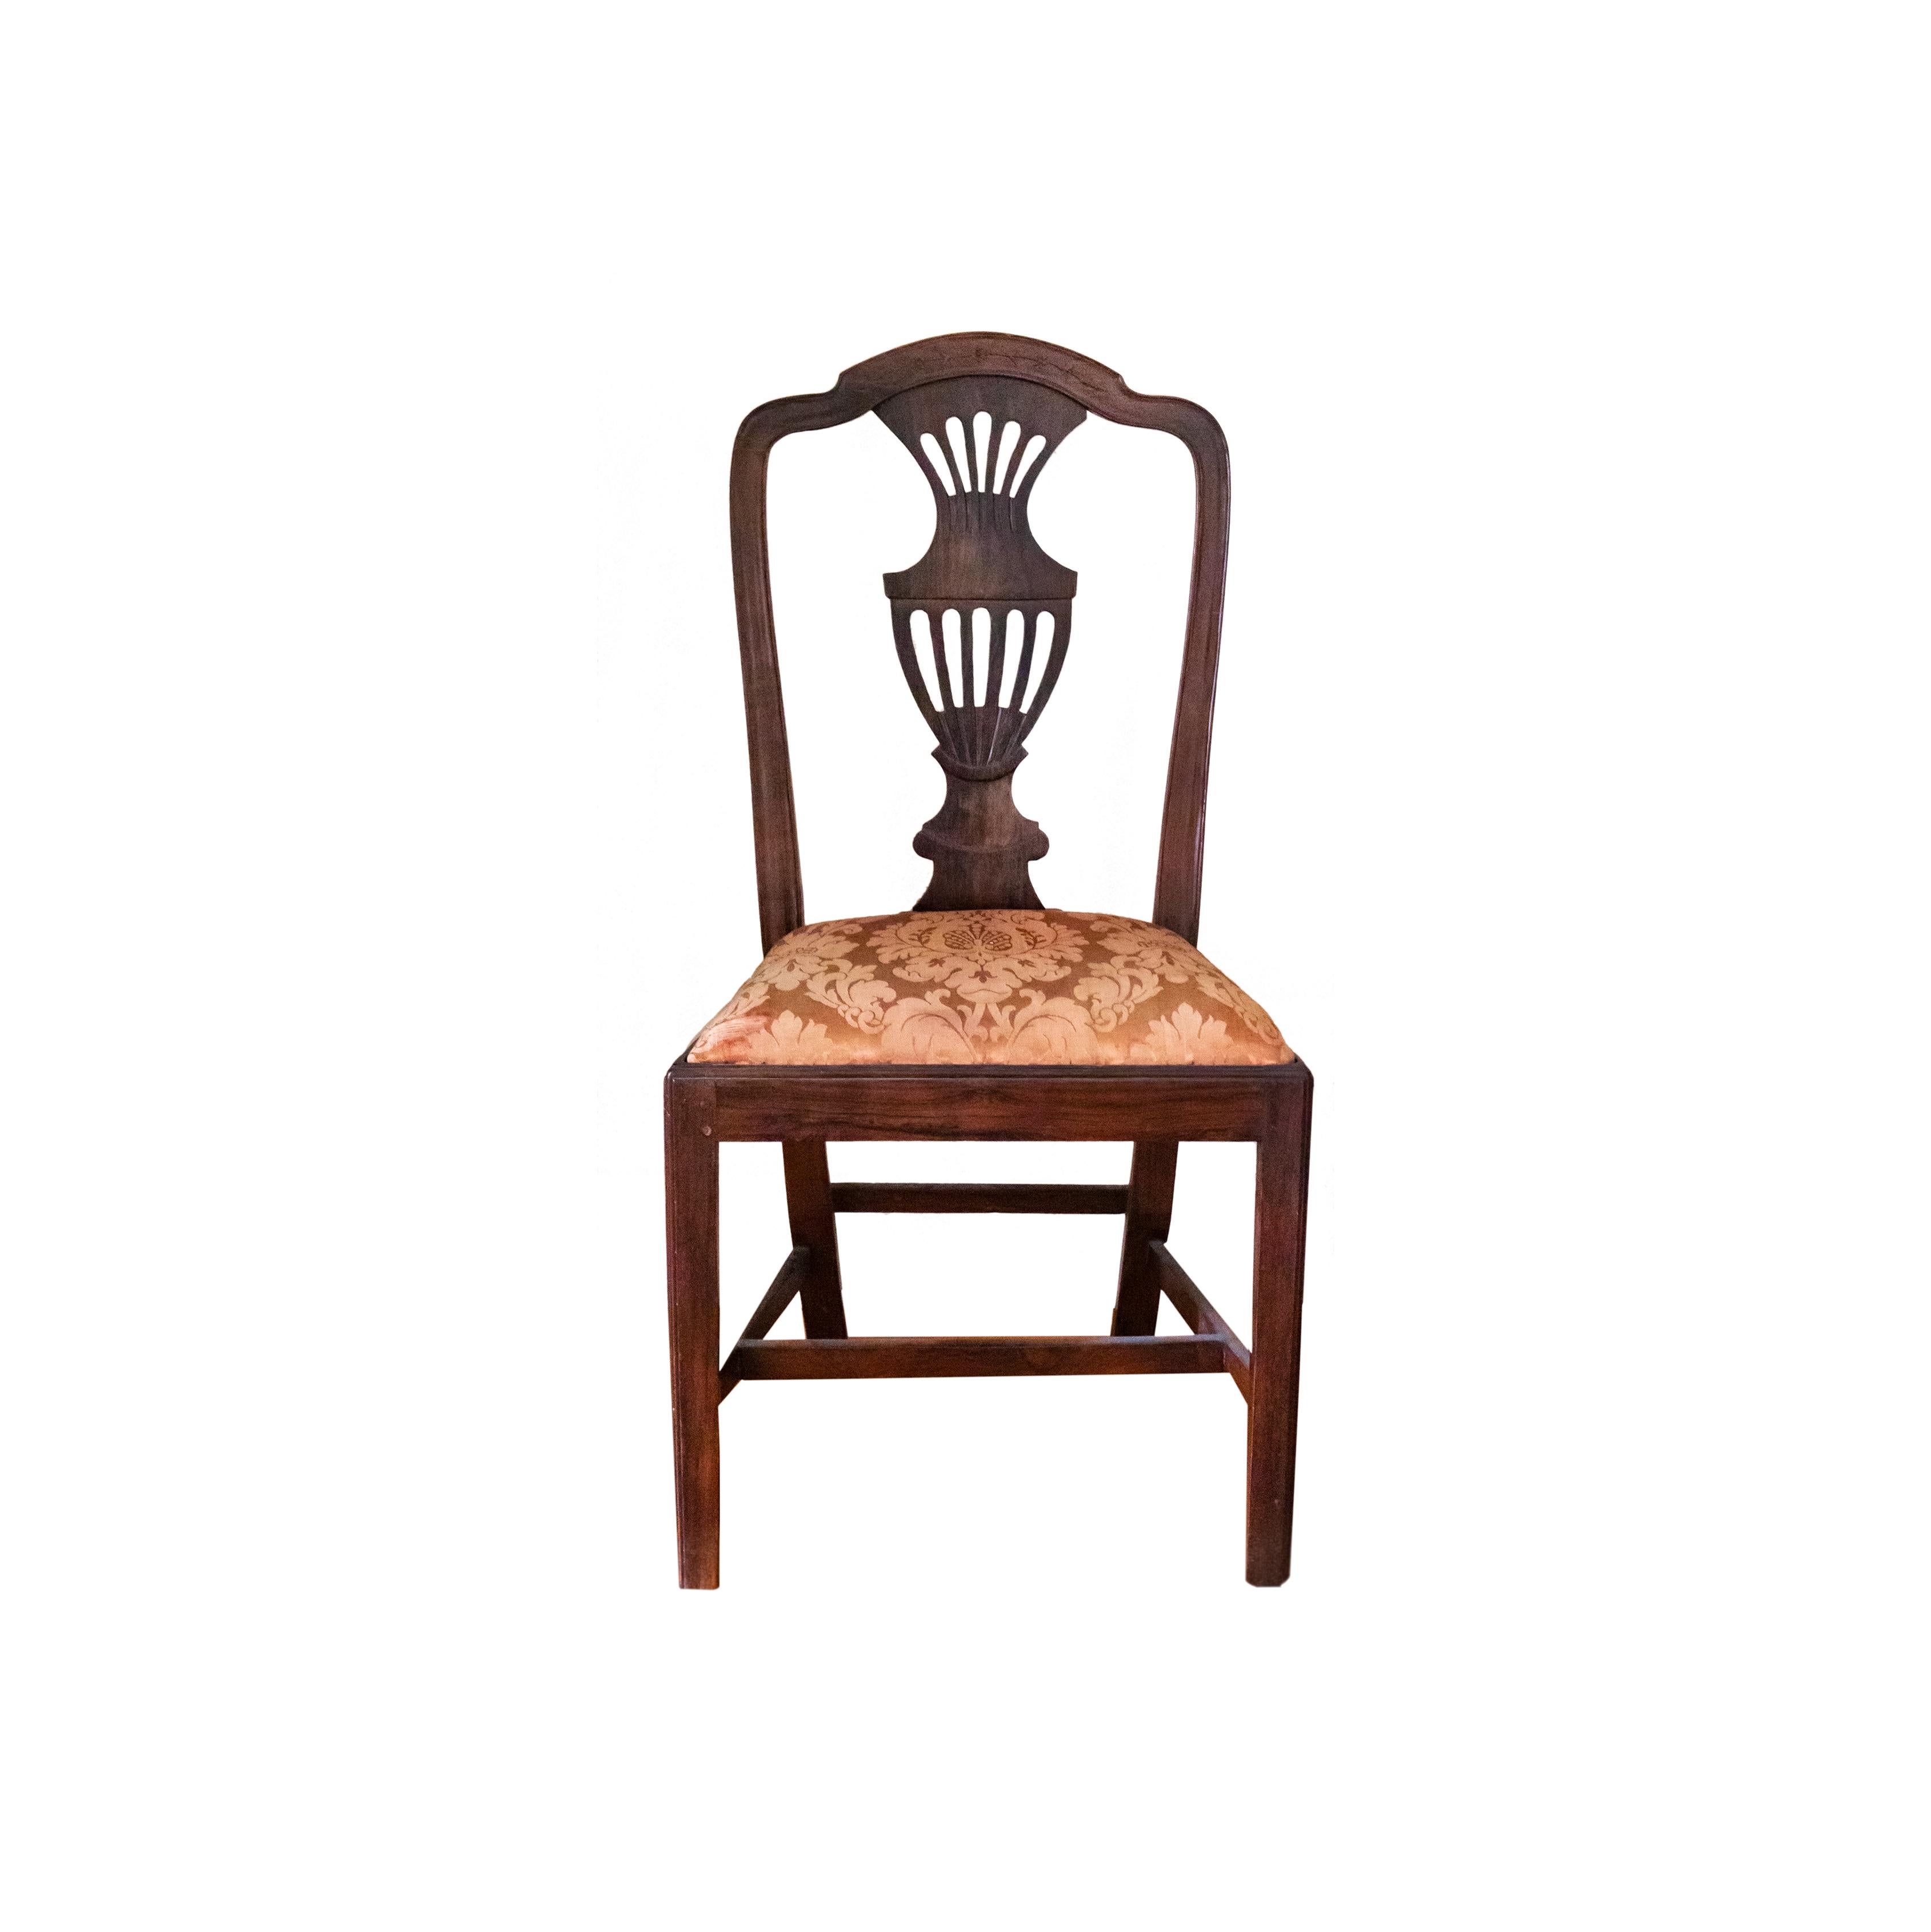 This 19th-century chair showcases the elegant Chippendale style, featuring a gracefully curved amphora back design and adorned with exquisite damascus upholstery. It has been meticulously cared for and has undergone a recent inspection by a skilled